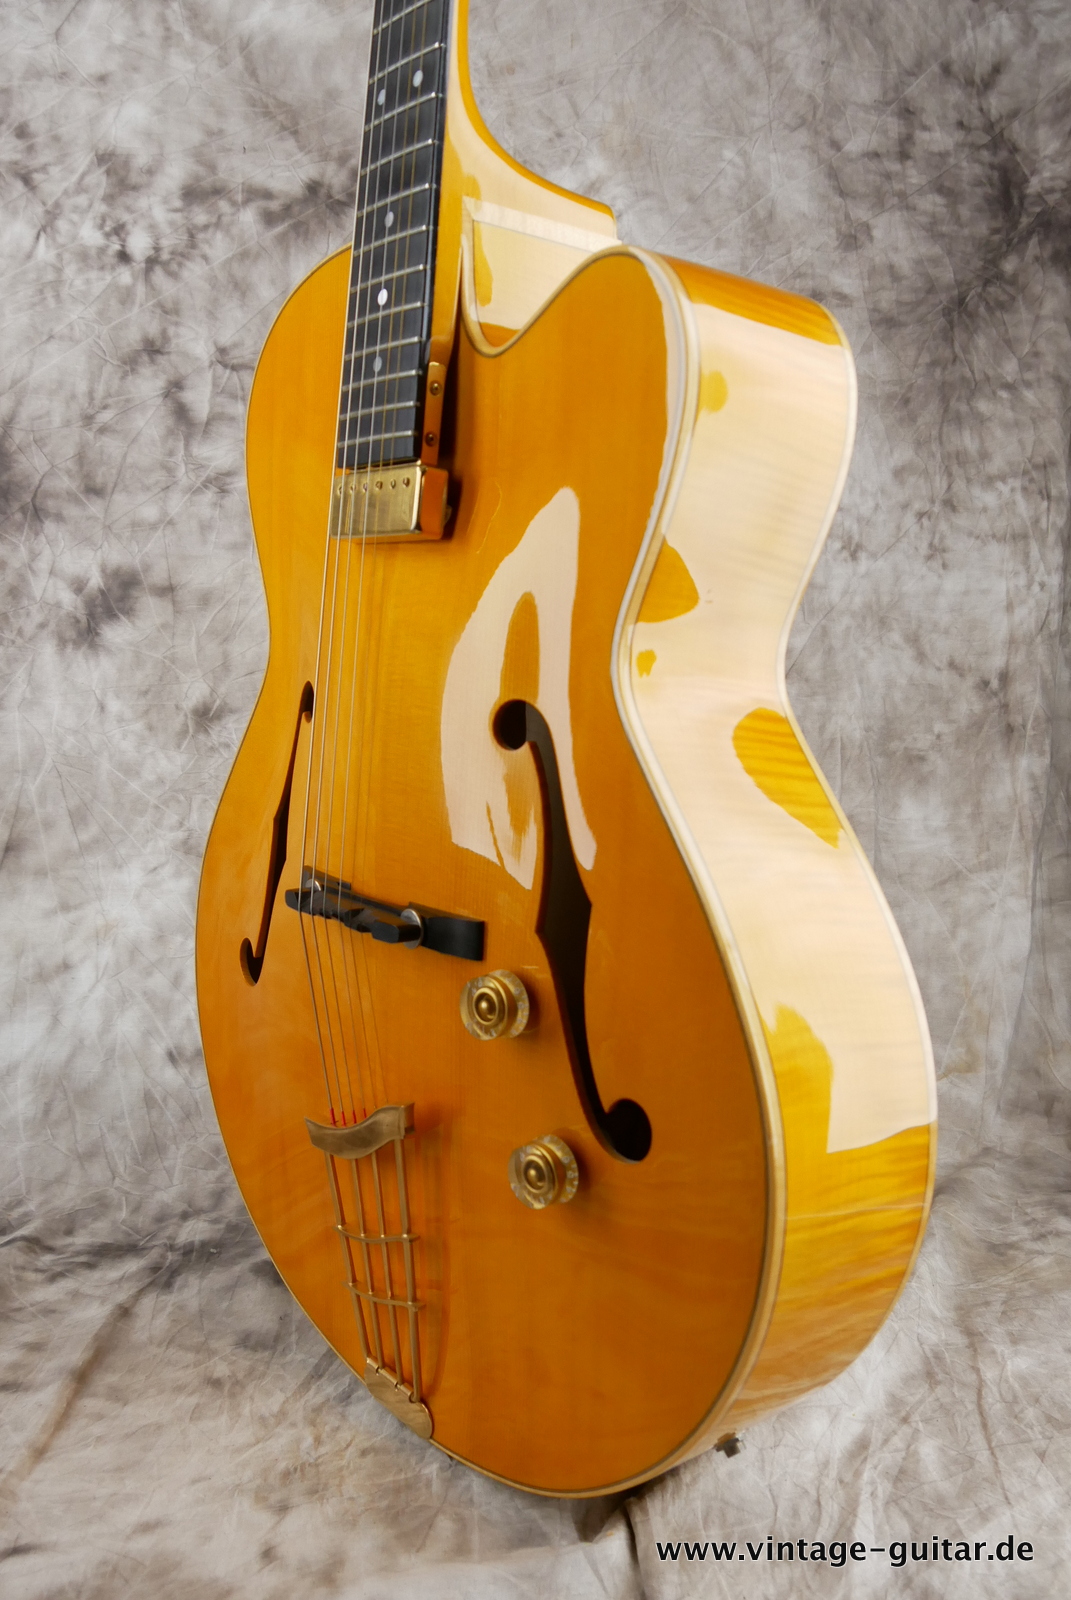 Launhardt_Fs3_german_guitar_archtop_all_solid-006.JPG